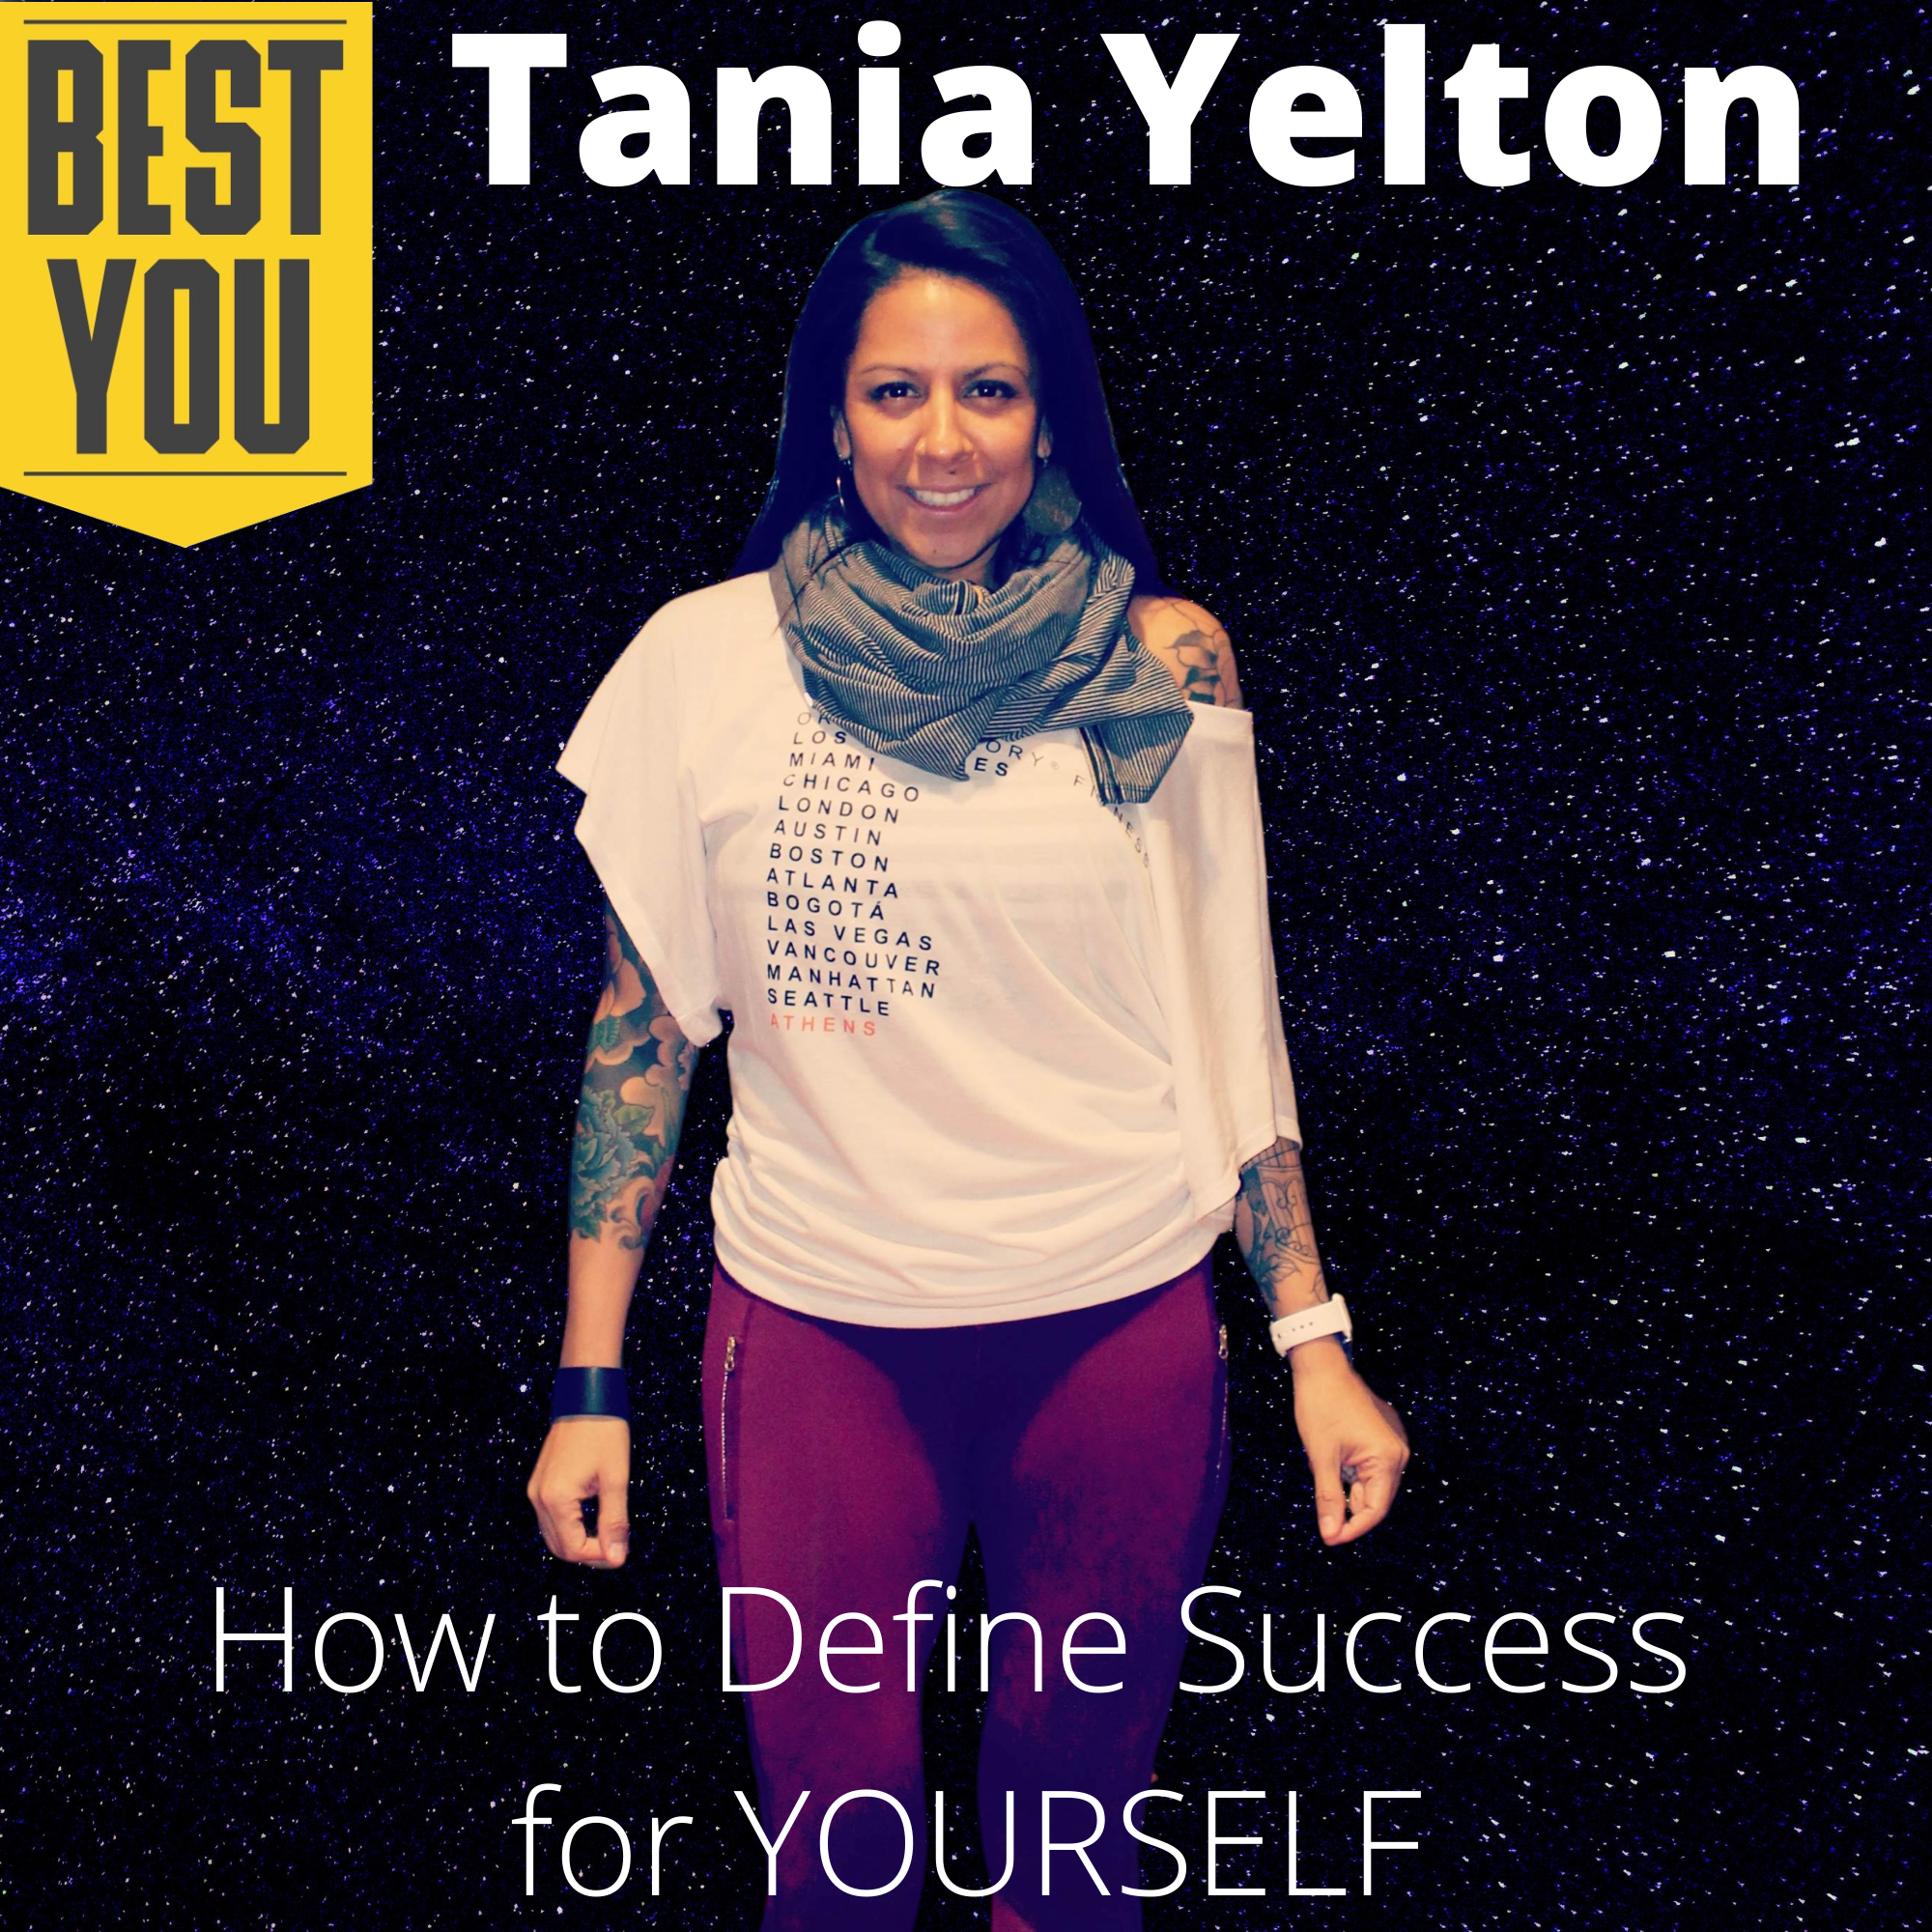 201. Tania Yelton - How an Injury Allowed Her to REDEFINE SUCCESS!